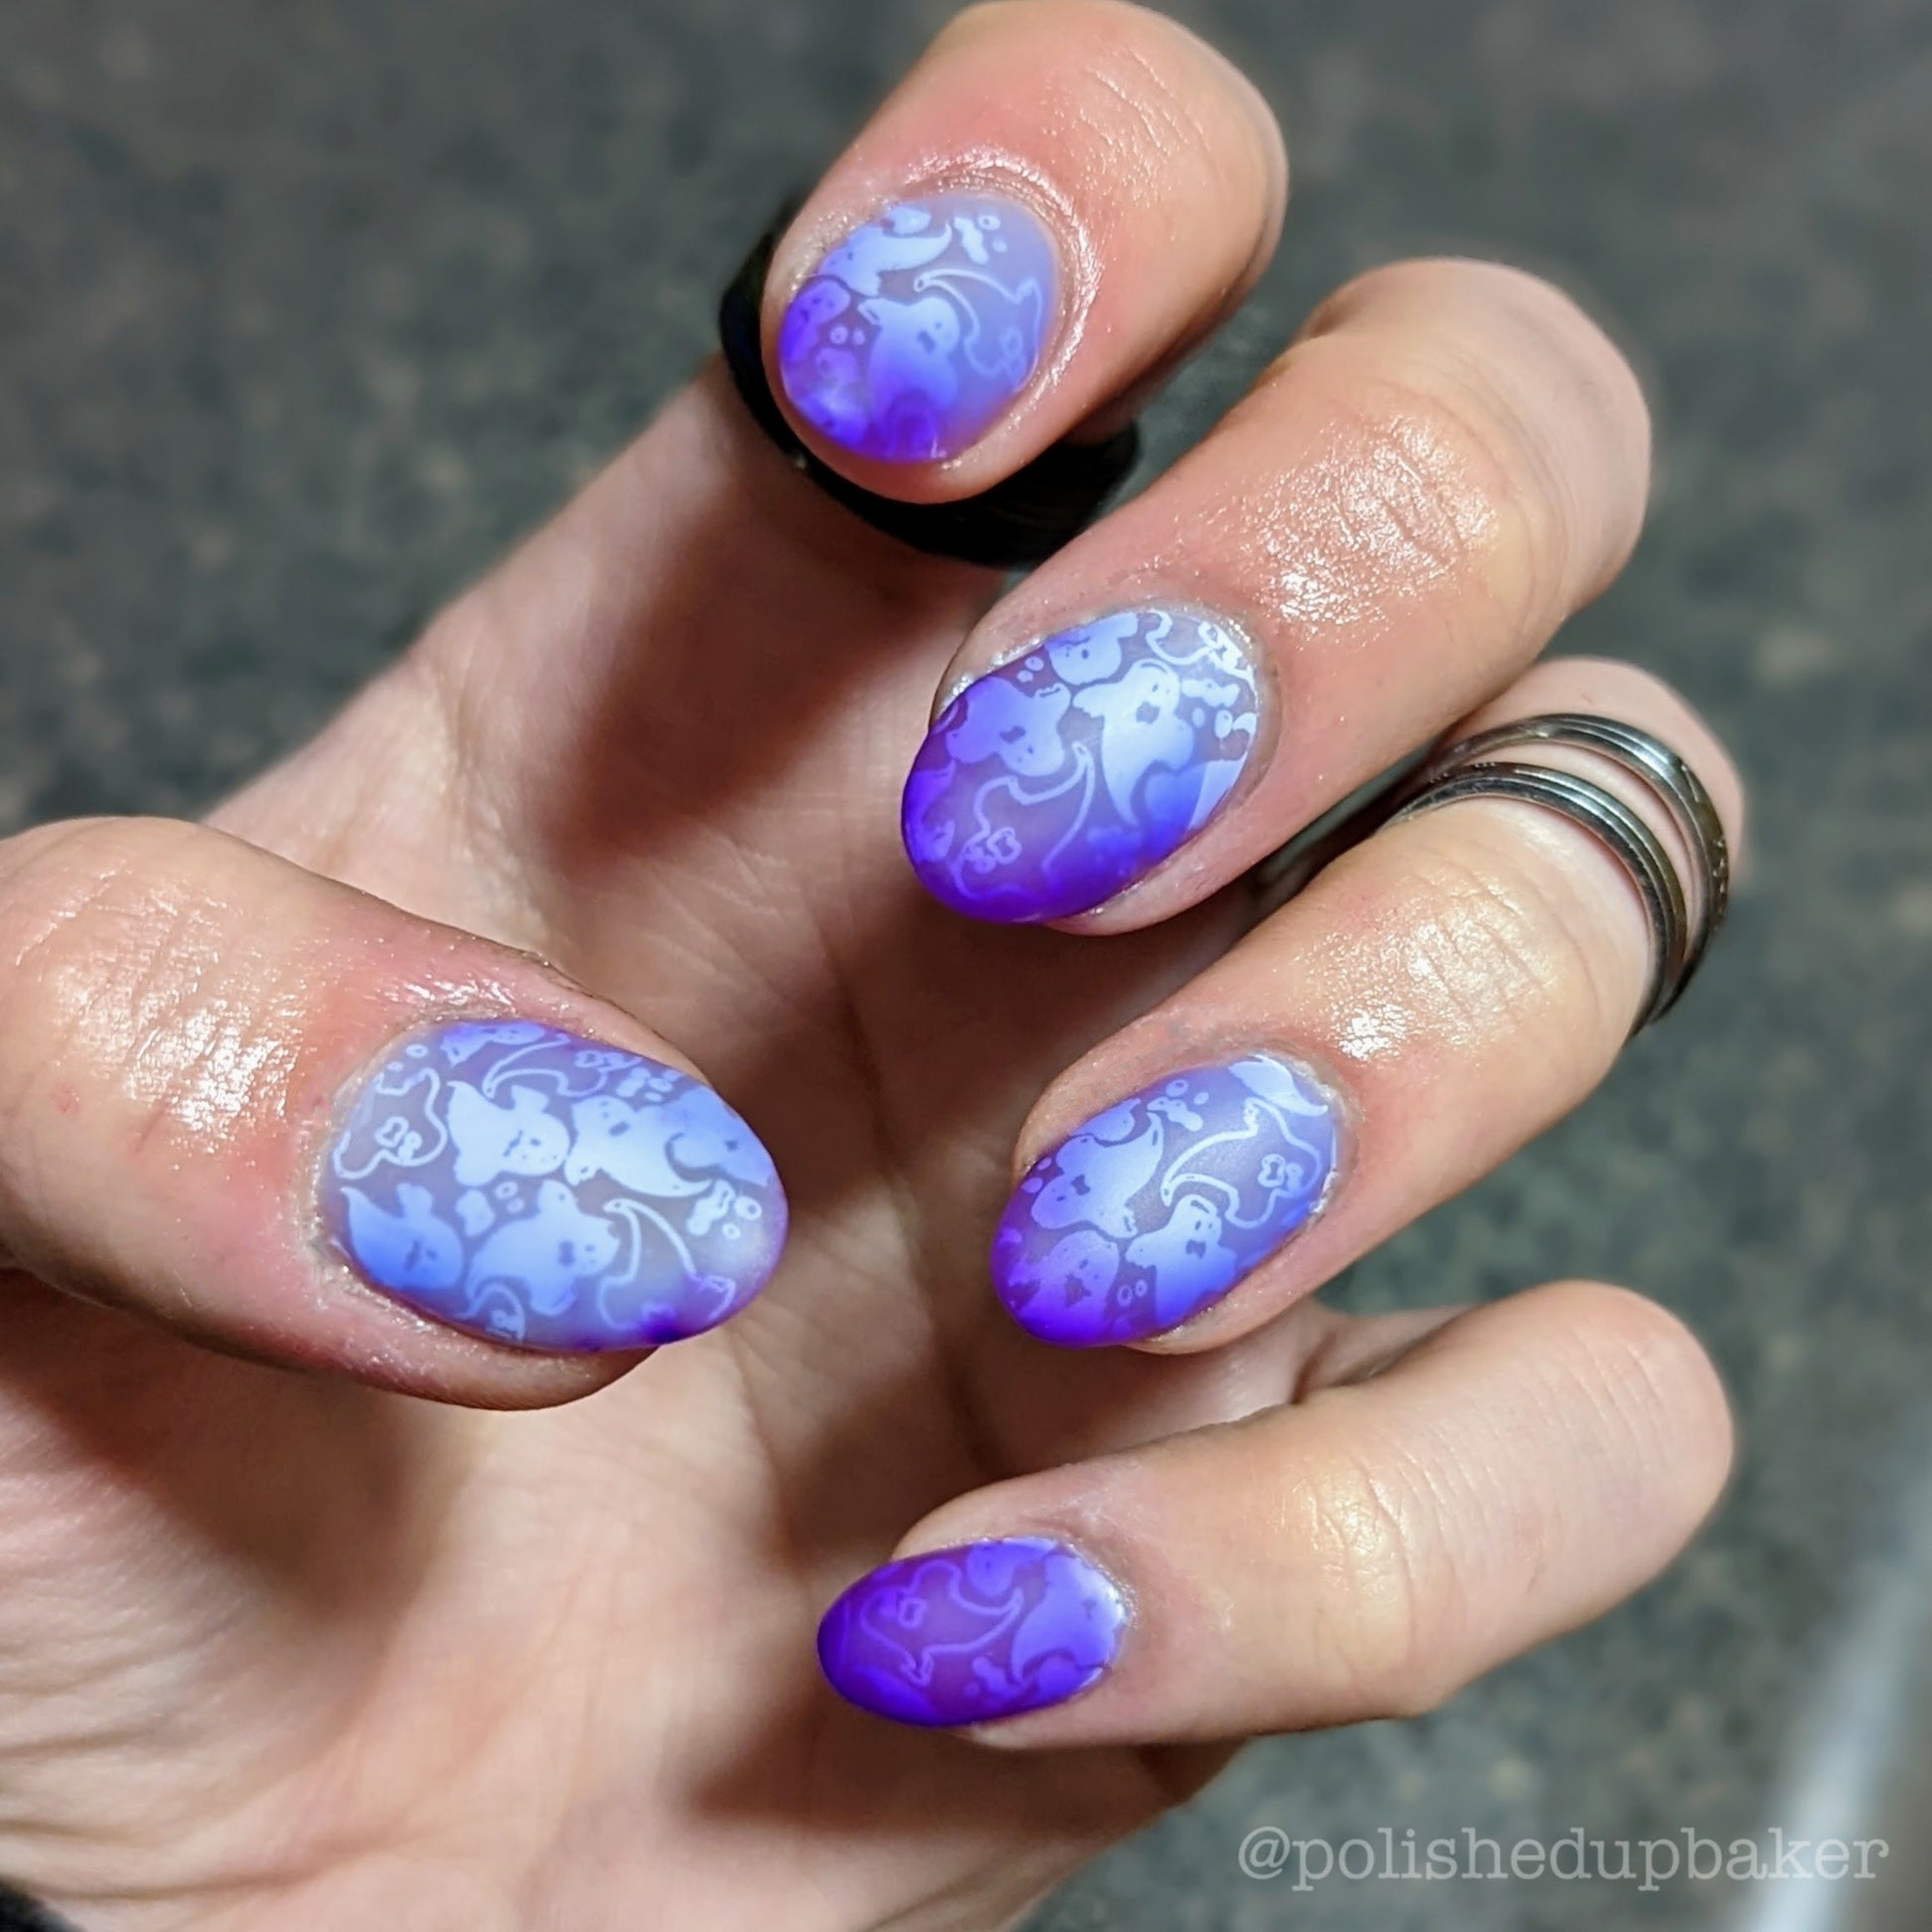 Vanishing Violet - Thermal Nail Polish - Clearly Rainbows Collection - Dam